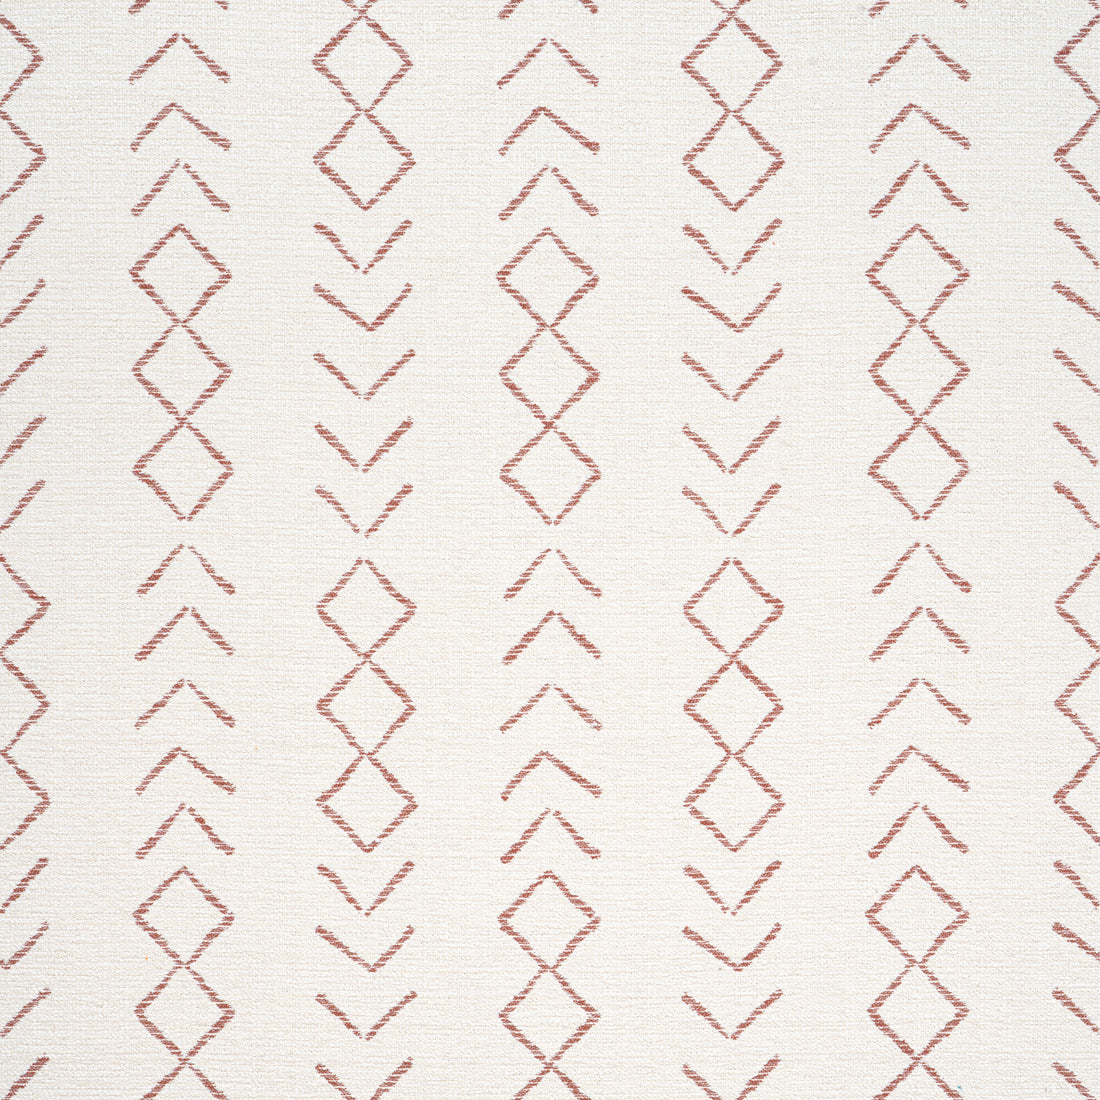 Anasazi fabric in canyon color - pattern number W78367 - by Thibaut in the  Sierra collection